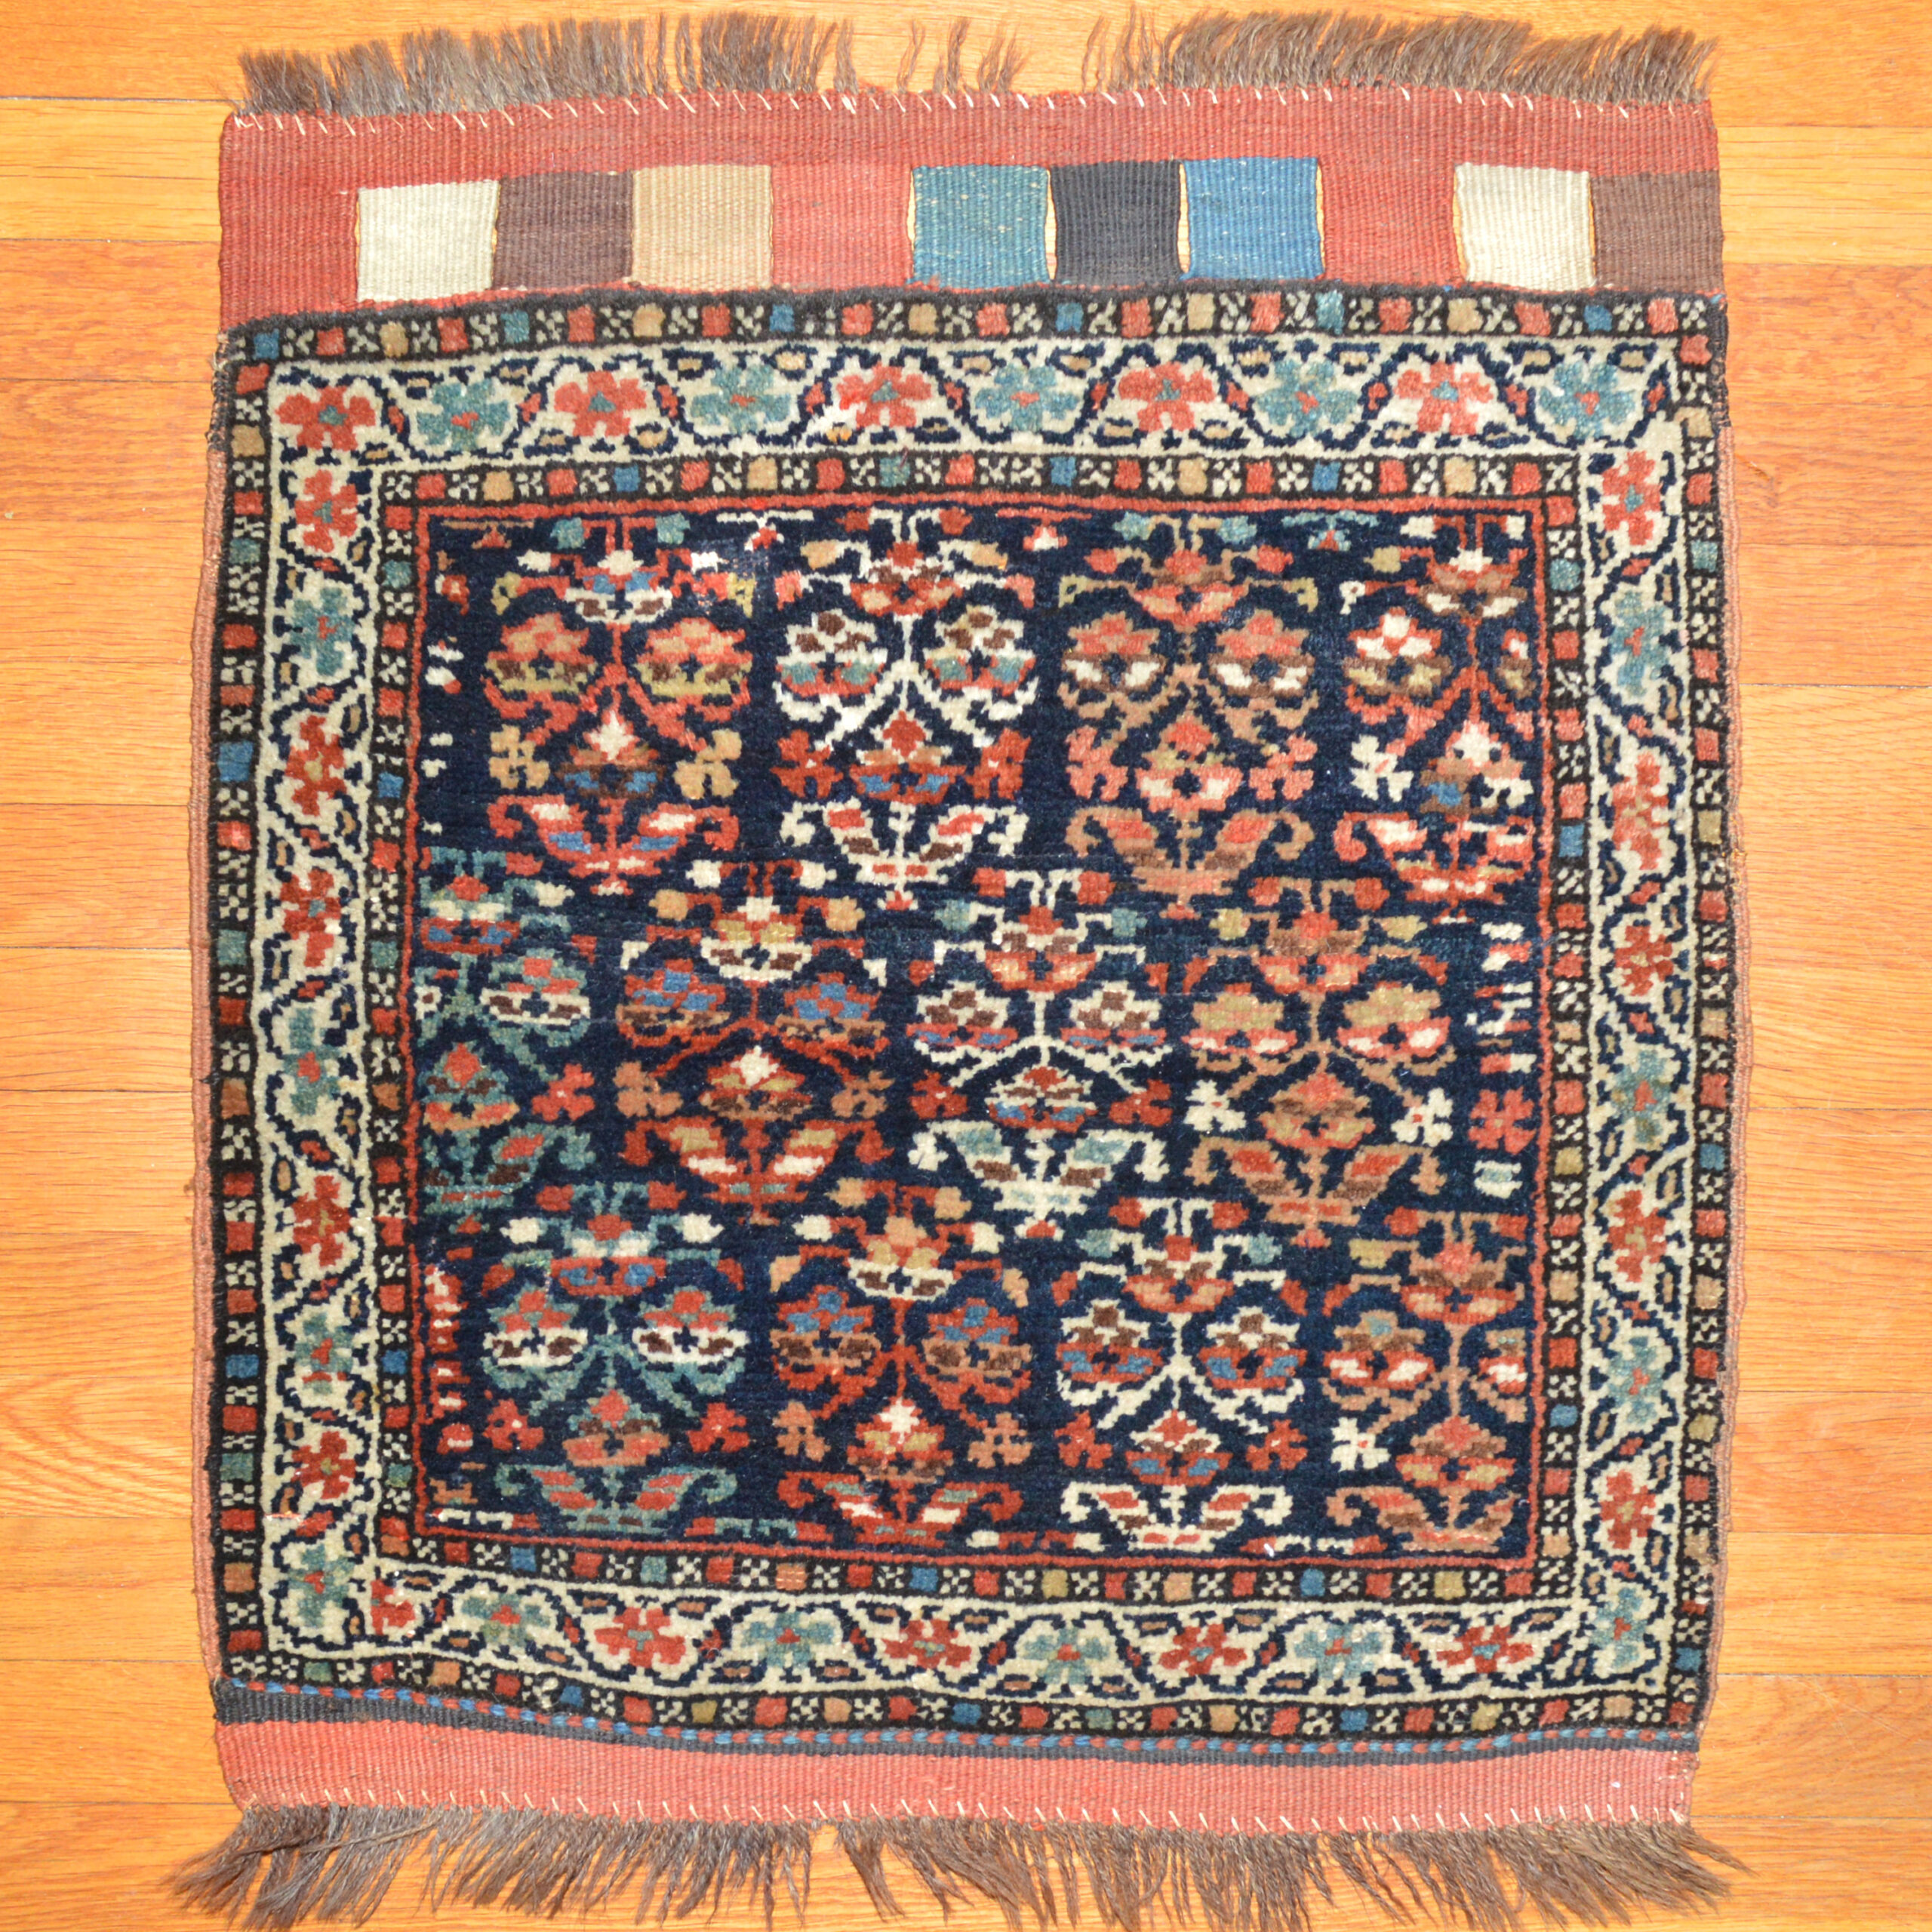 An antique northwest Persian tribal bag face, probably woven by a member of the Shah Savan tribe but possibly Kurdish, circa 1890. The navy blue field is decorated with polychromatic stylized flowers and framed by an ivory scrolling vine and flower border. Douglas Stock Gallery, antique tribal rugs and bags, Boston,MA area New England